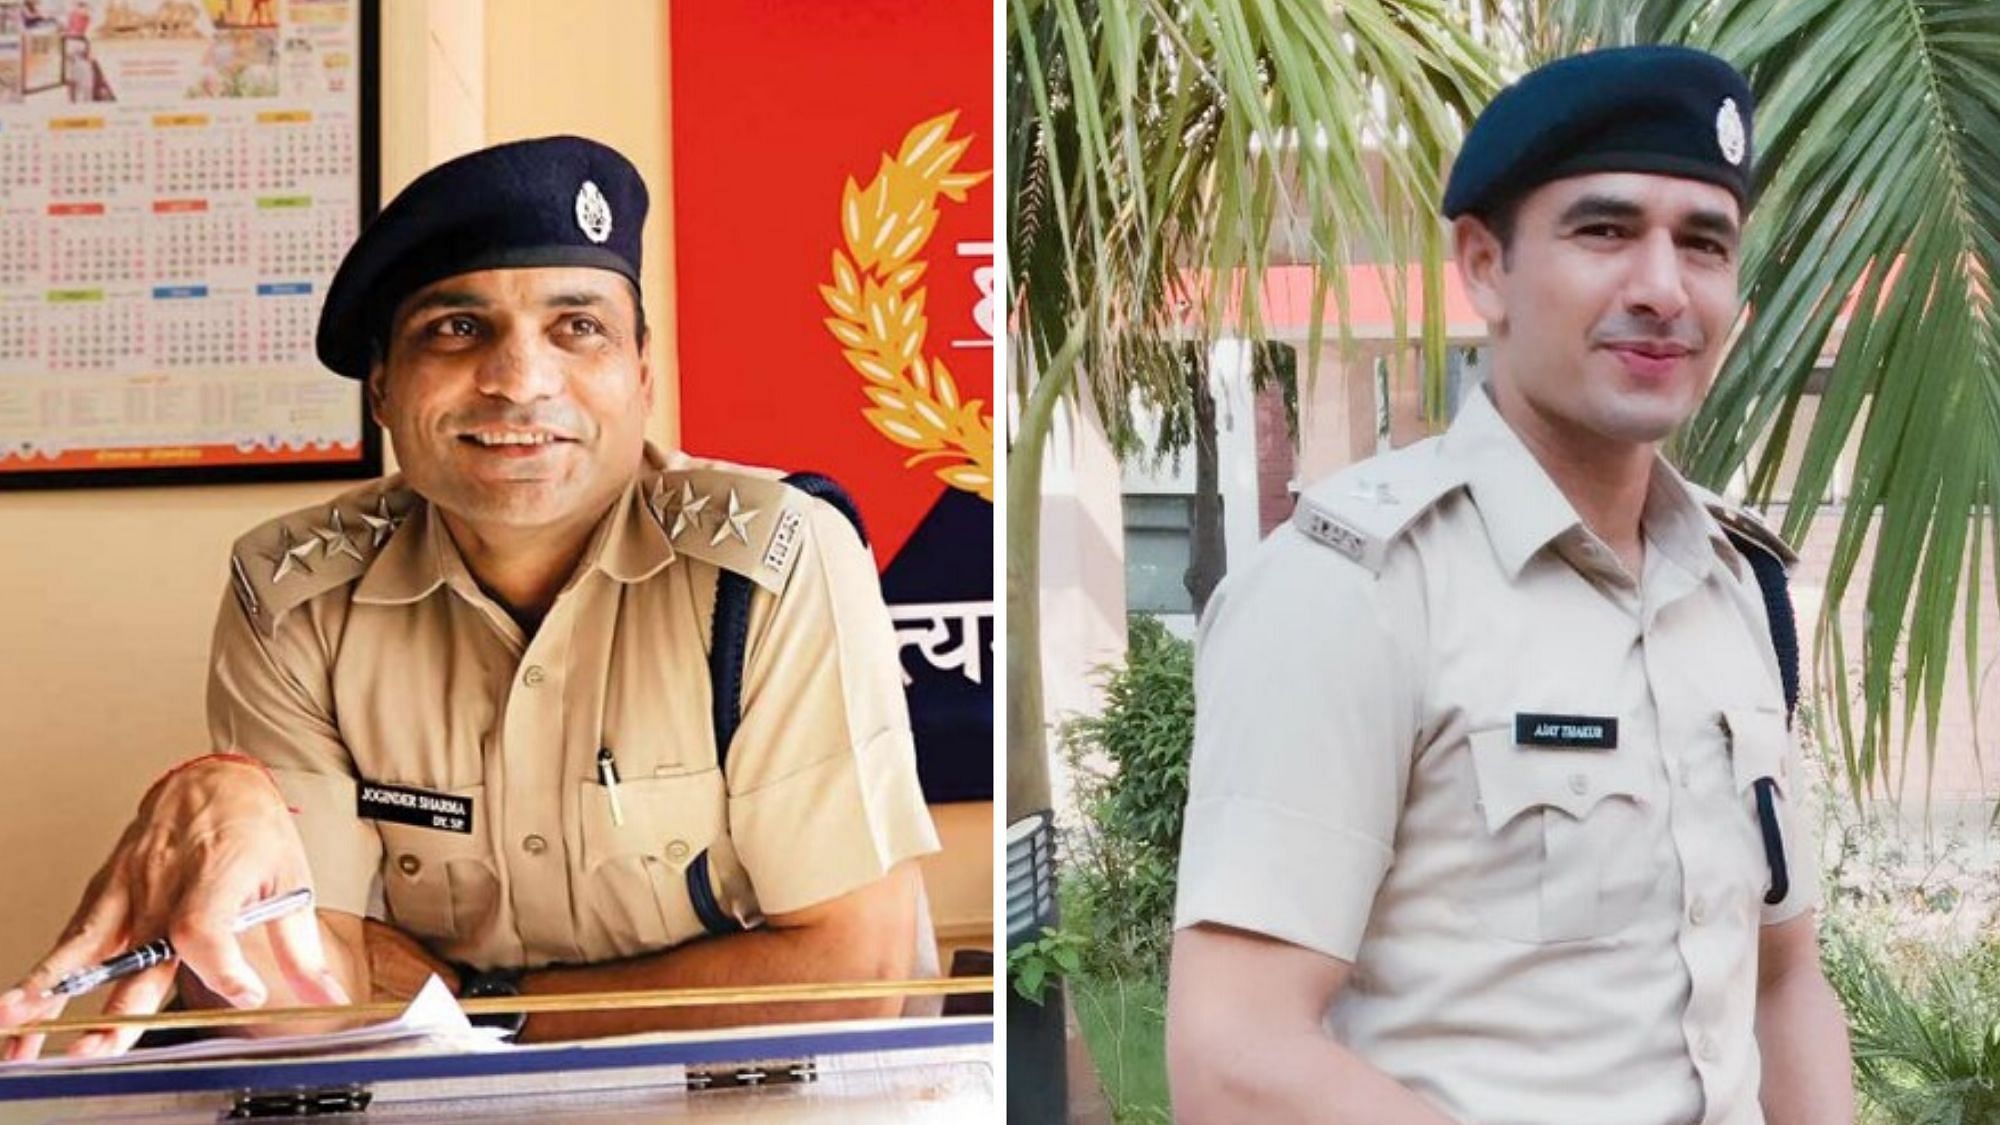 T20 World Cup-winning cricketer Joginder Sharma and Asian Games champion kabaddi player Ajay Thakur are now full-time police officers.